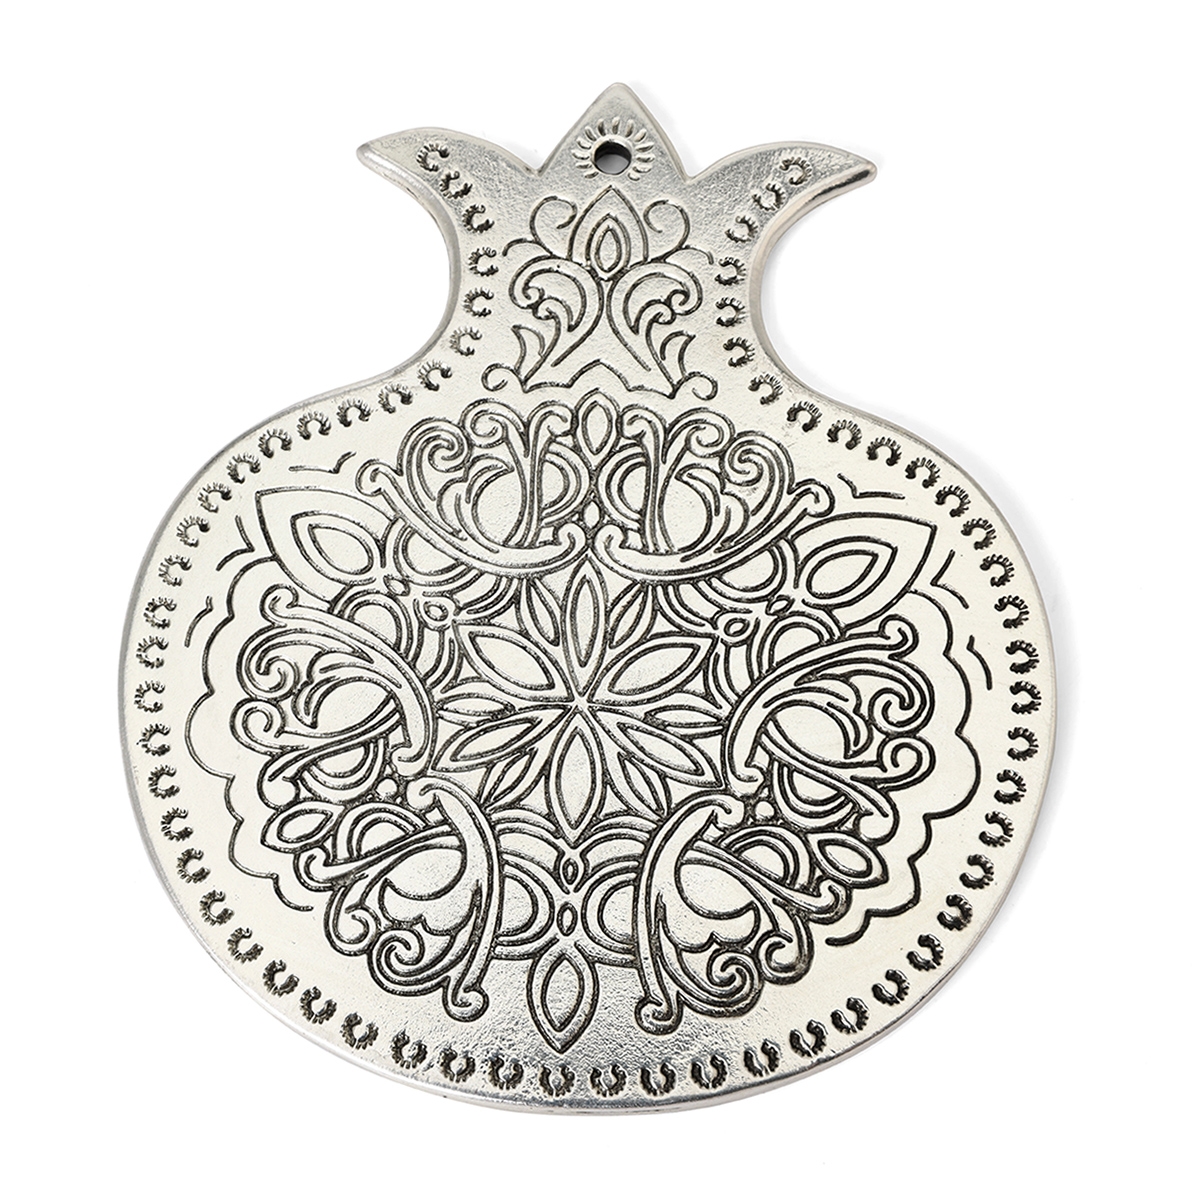 Israel Museum Collection Silver-Plated Pomegranate Amulet Wall Hanging - 1